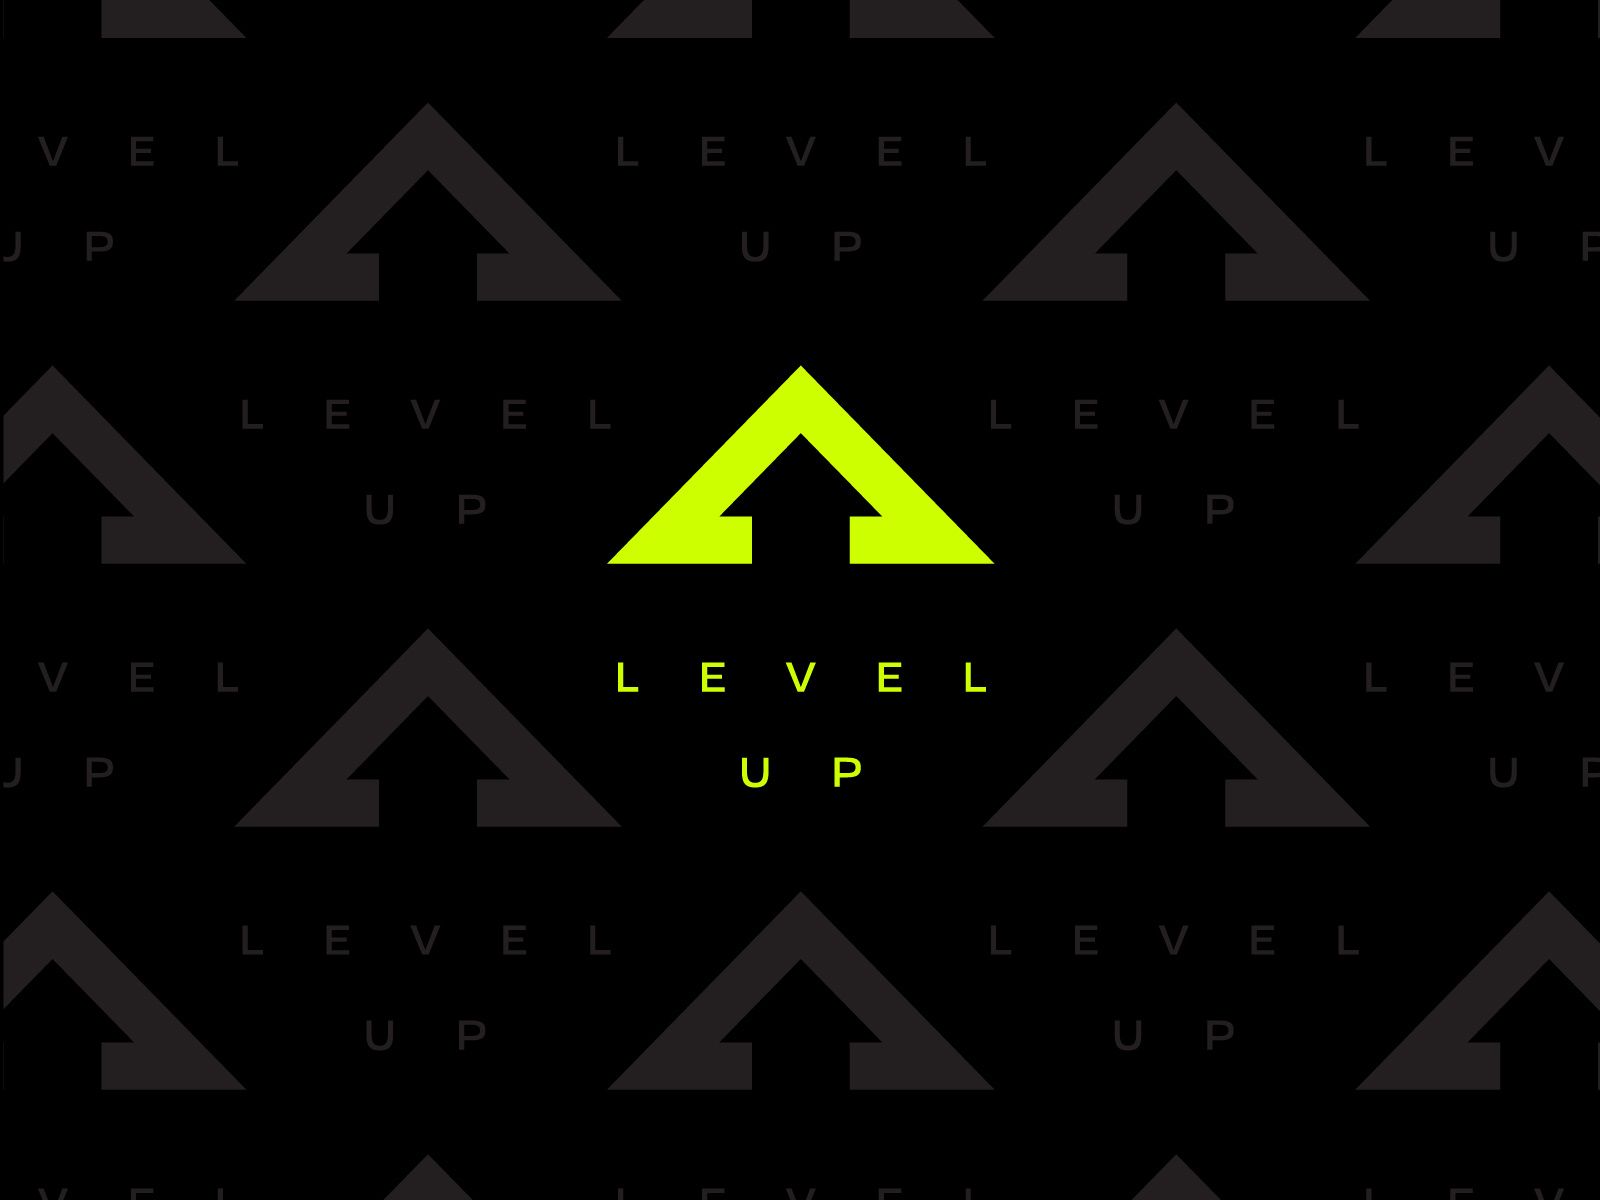 Level Up logo and pattern